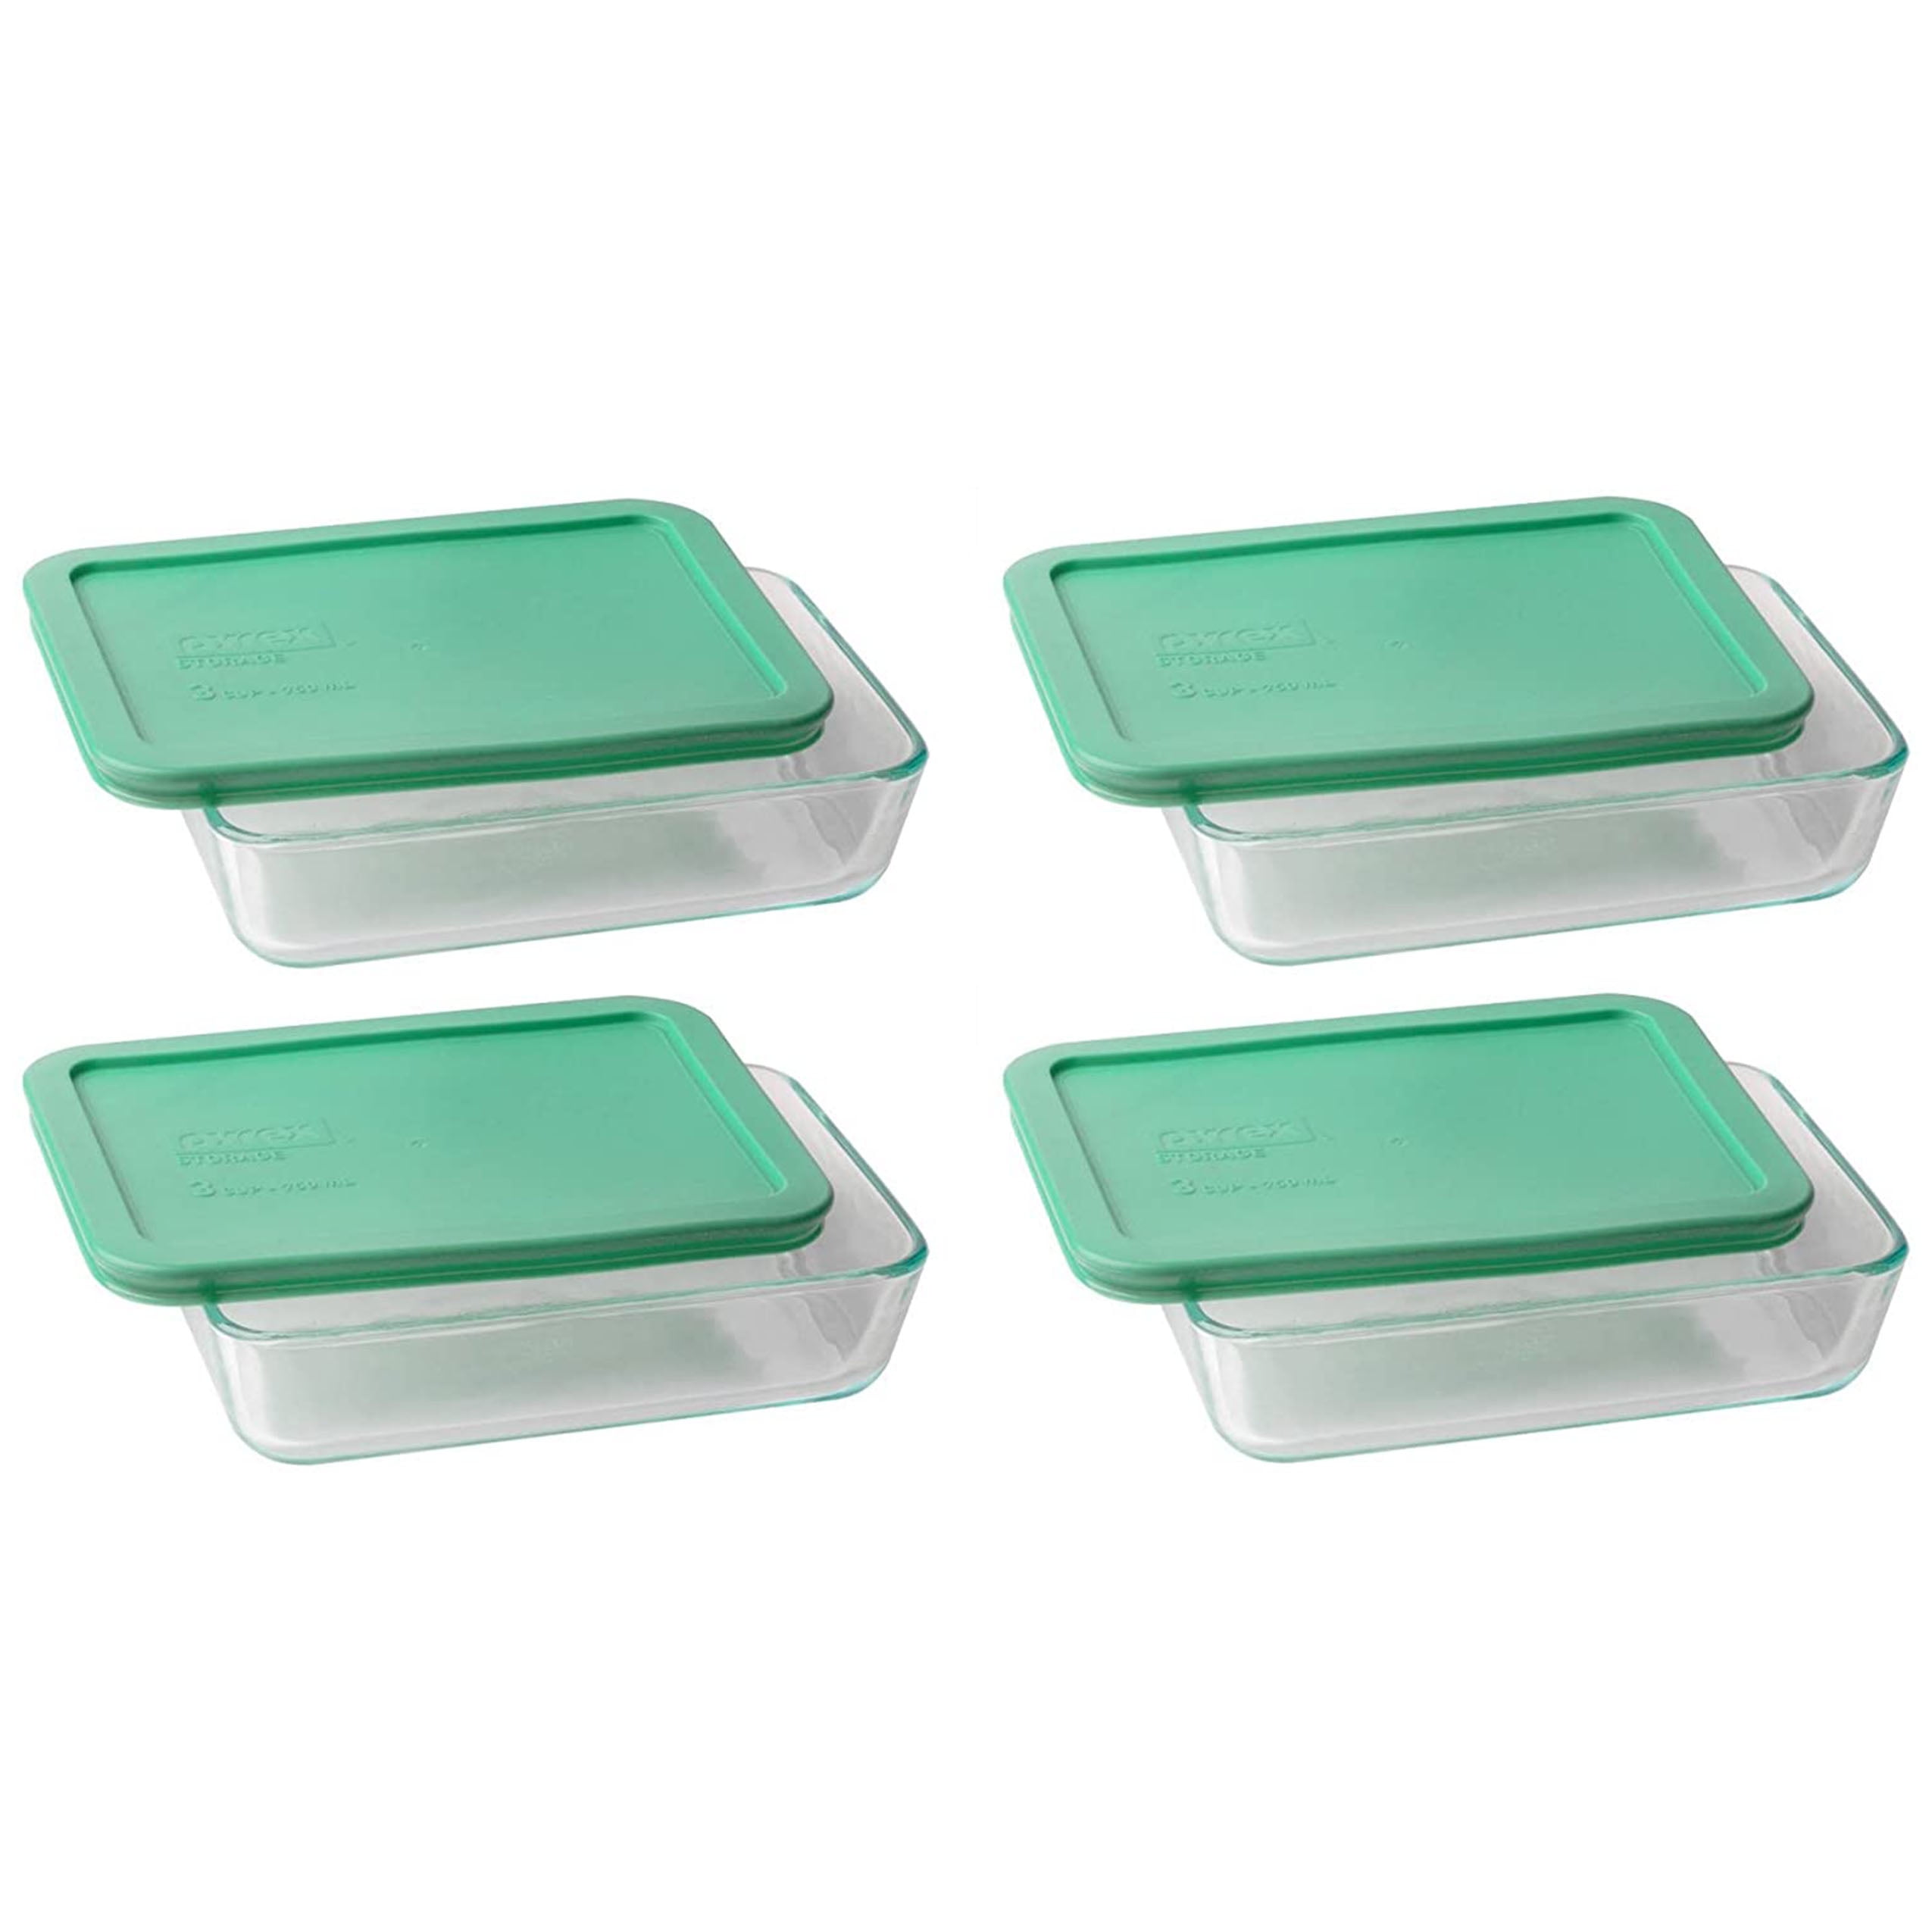 by Pyrex Pyrex 7210-PC Rectangle 3 Cup Storage Lid for Glass Dish 2, Light Green